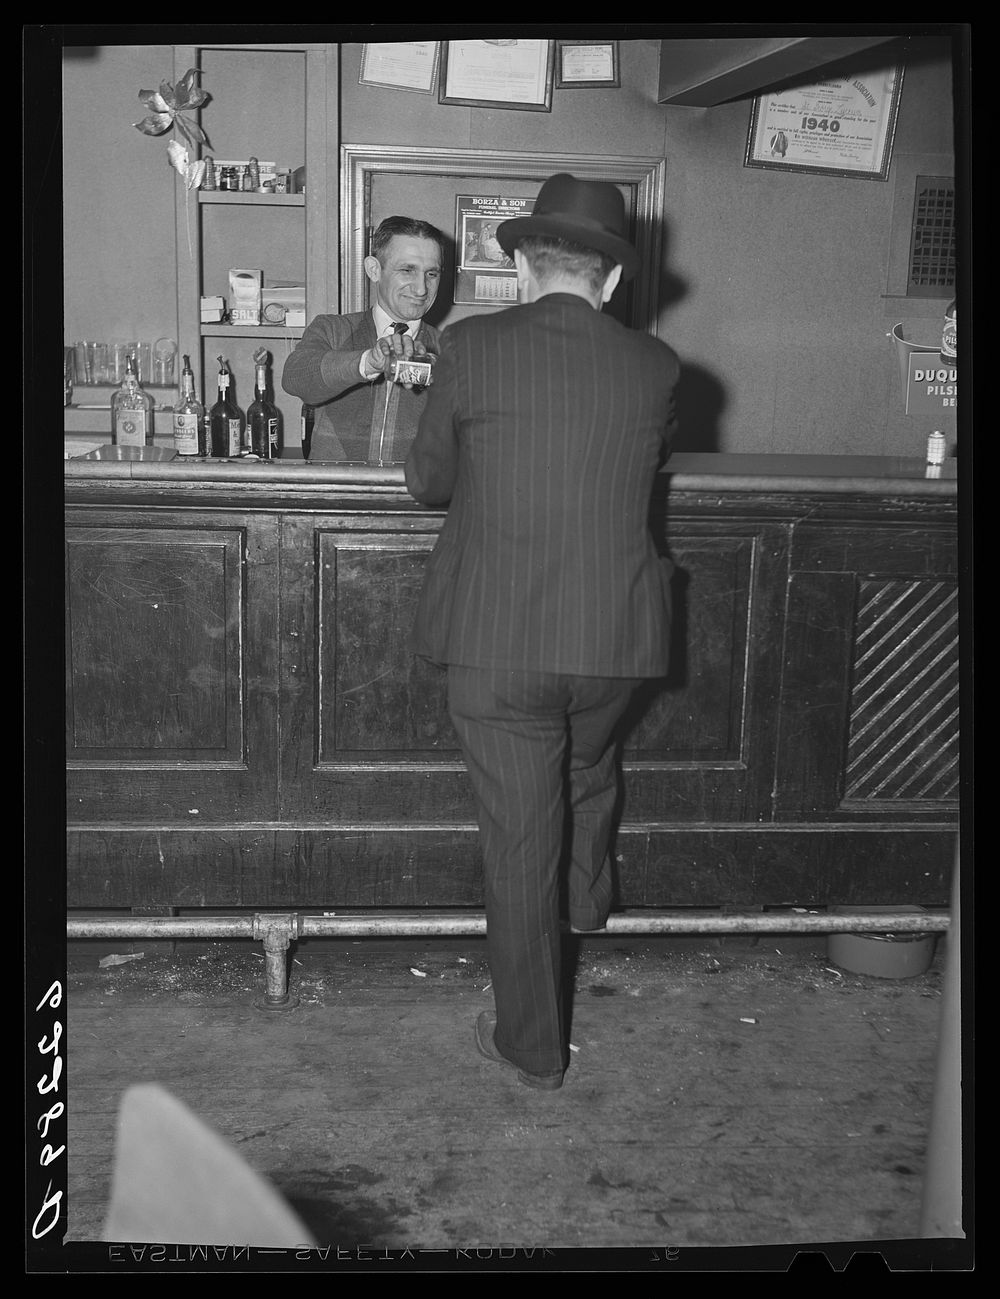 Bar at Catholic Sokol Club. Ambridge, Pennsylvania. Sourced from the Library of Congress.